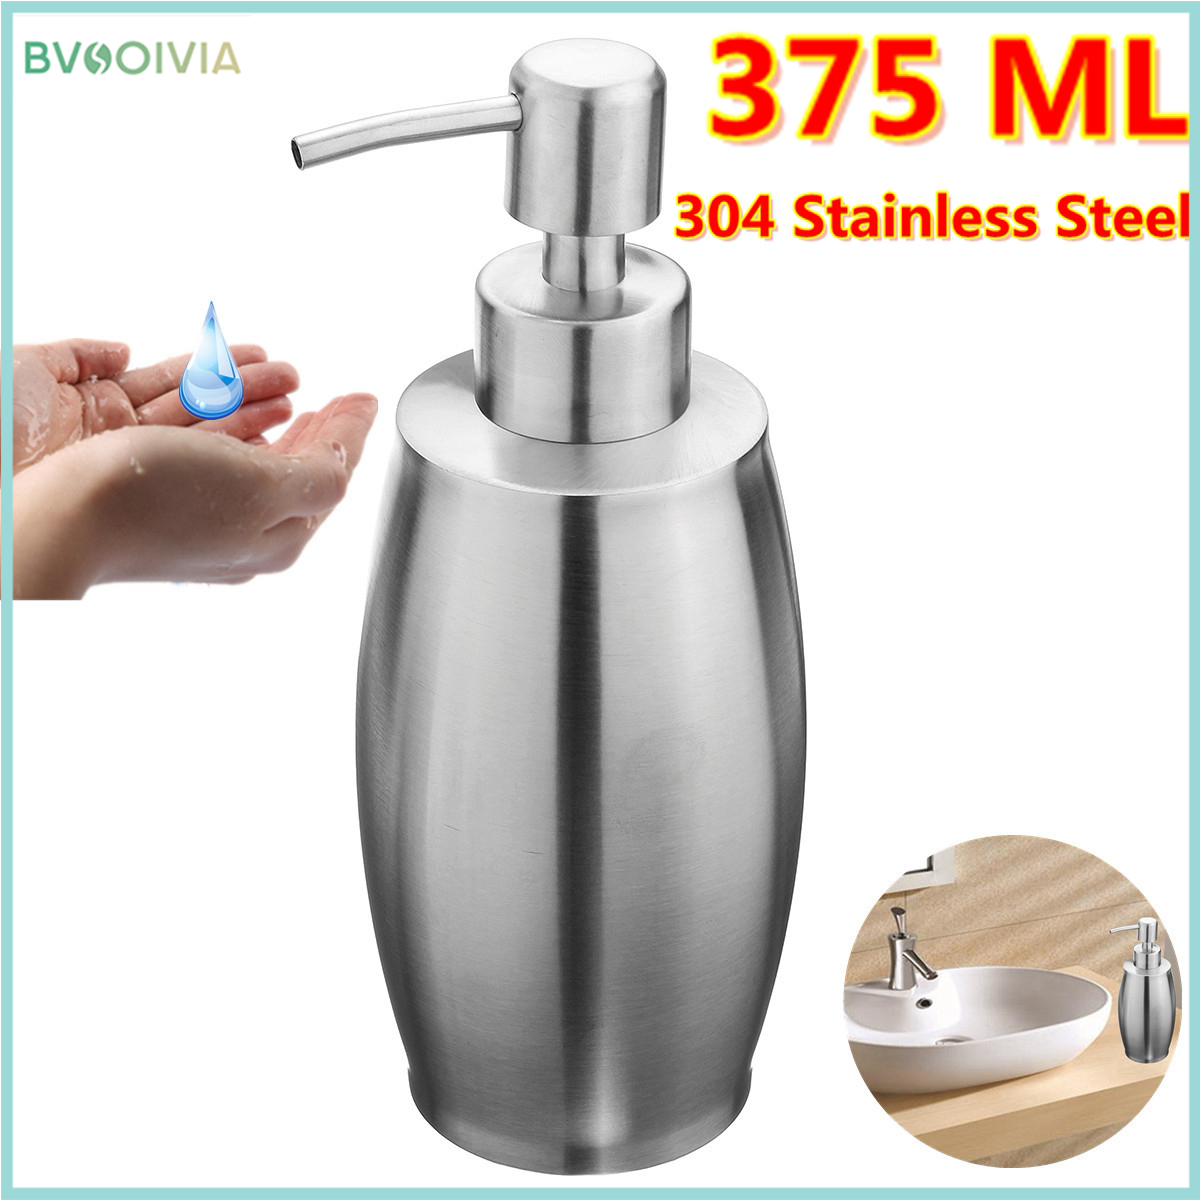 1268OZ375ML-Hand-Soap--Lotion-Pump-Dispenser-Liquid-Shampoo-Container-Stainless-Steel-for-Home-Hotel-1109867-1